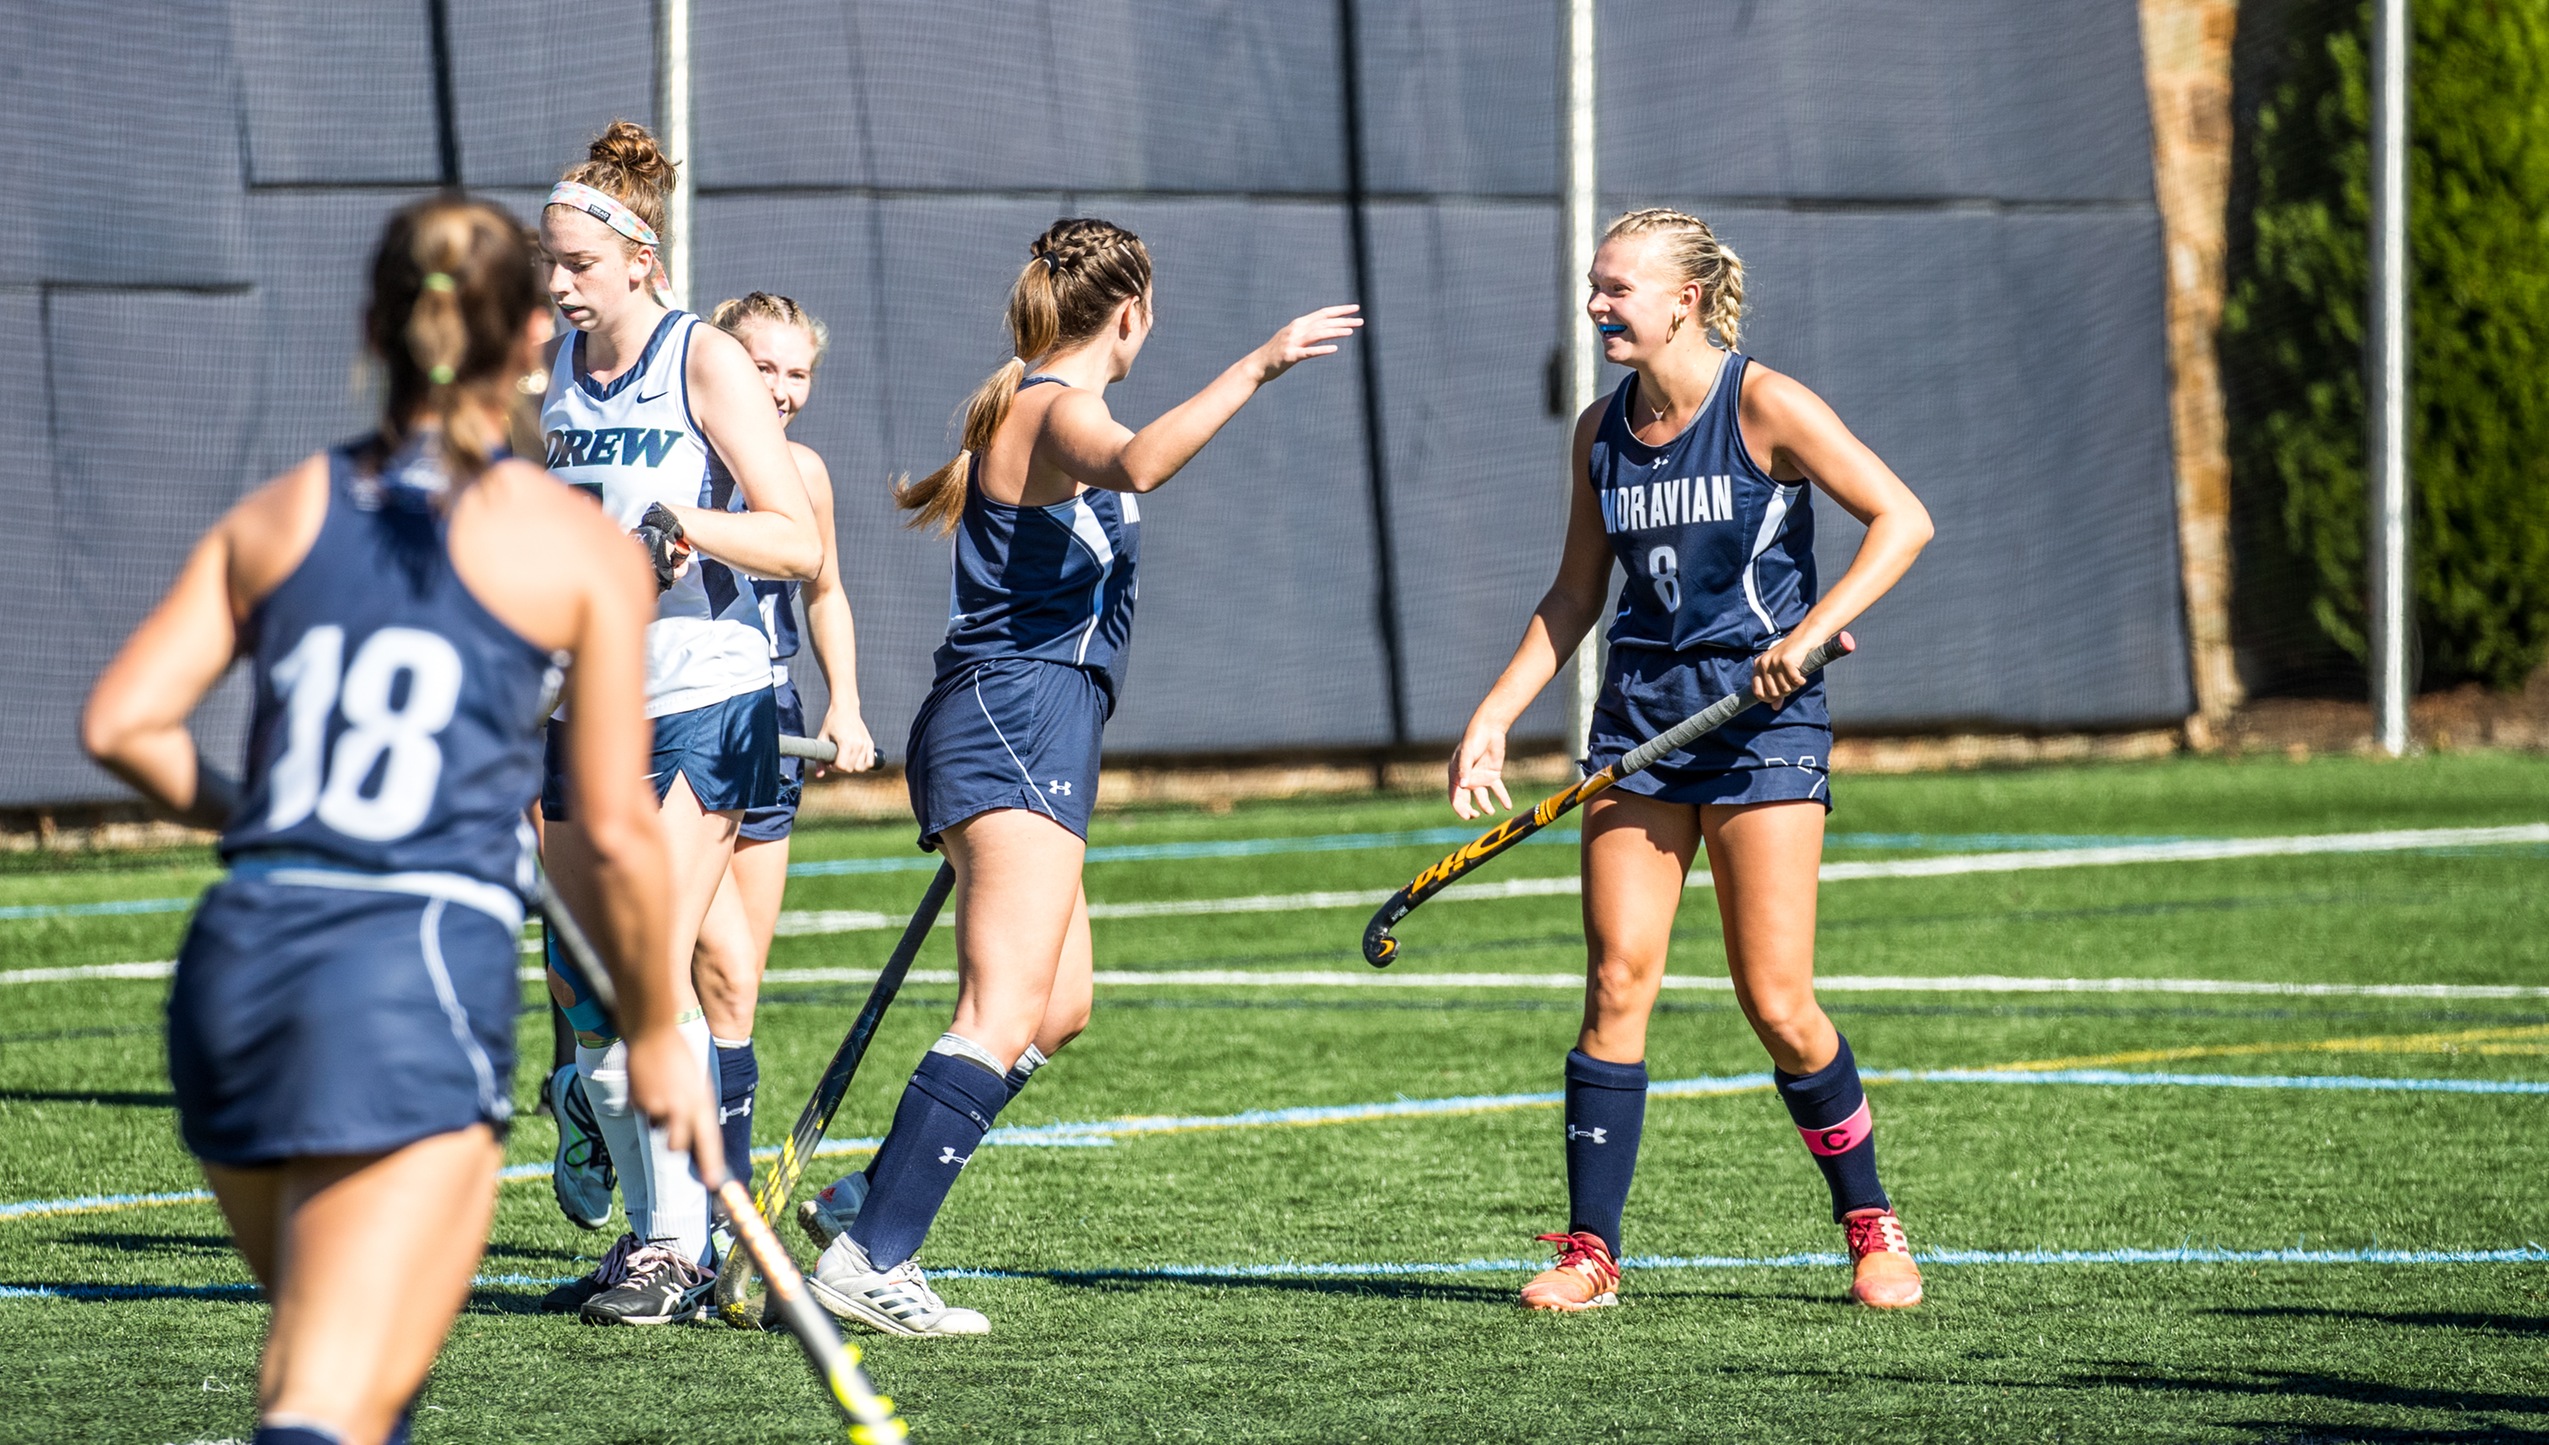 Sophomore Sydney Anderson and senior Maddie Call celebrate a goal in a match versus Drew University earlier this season on John Makuvek Field. Photo by Cosmic Fox Media / Matthew Levine '11